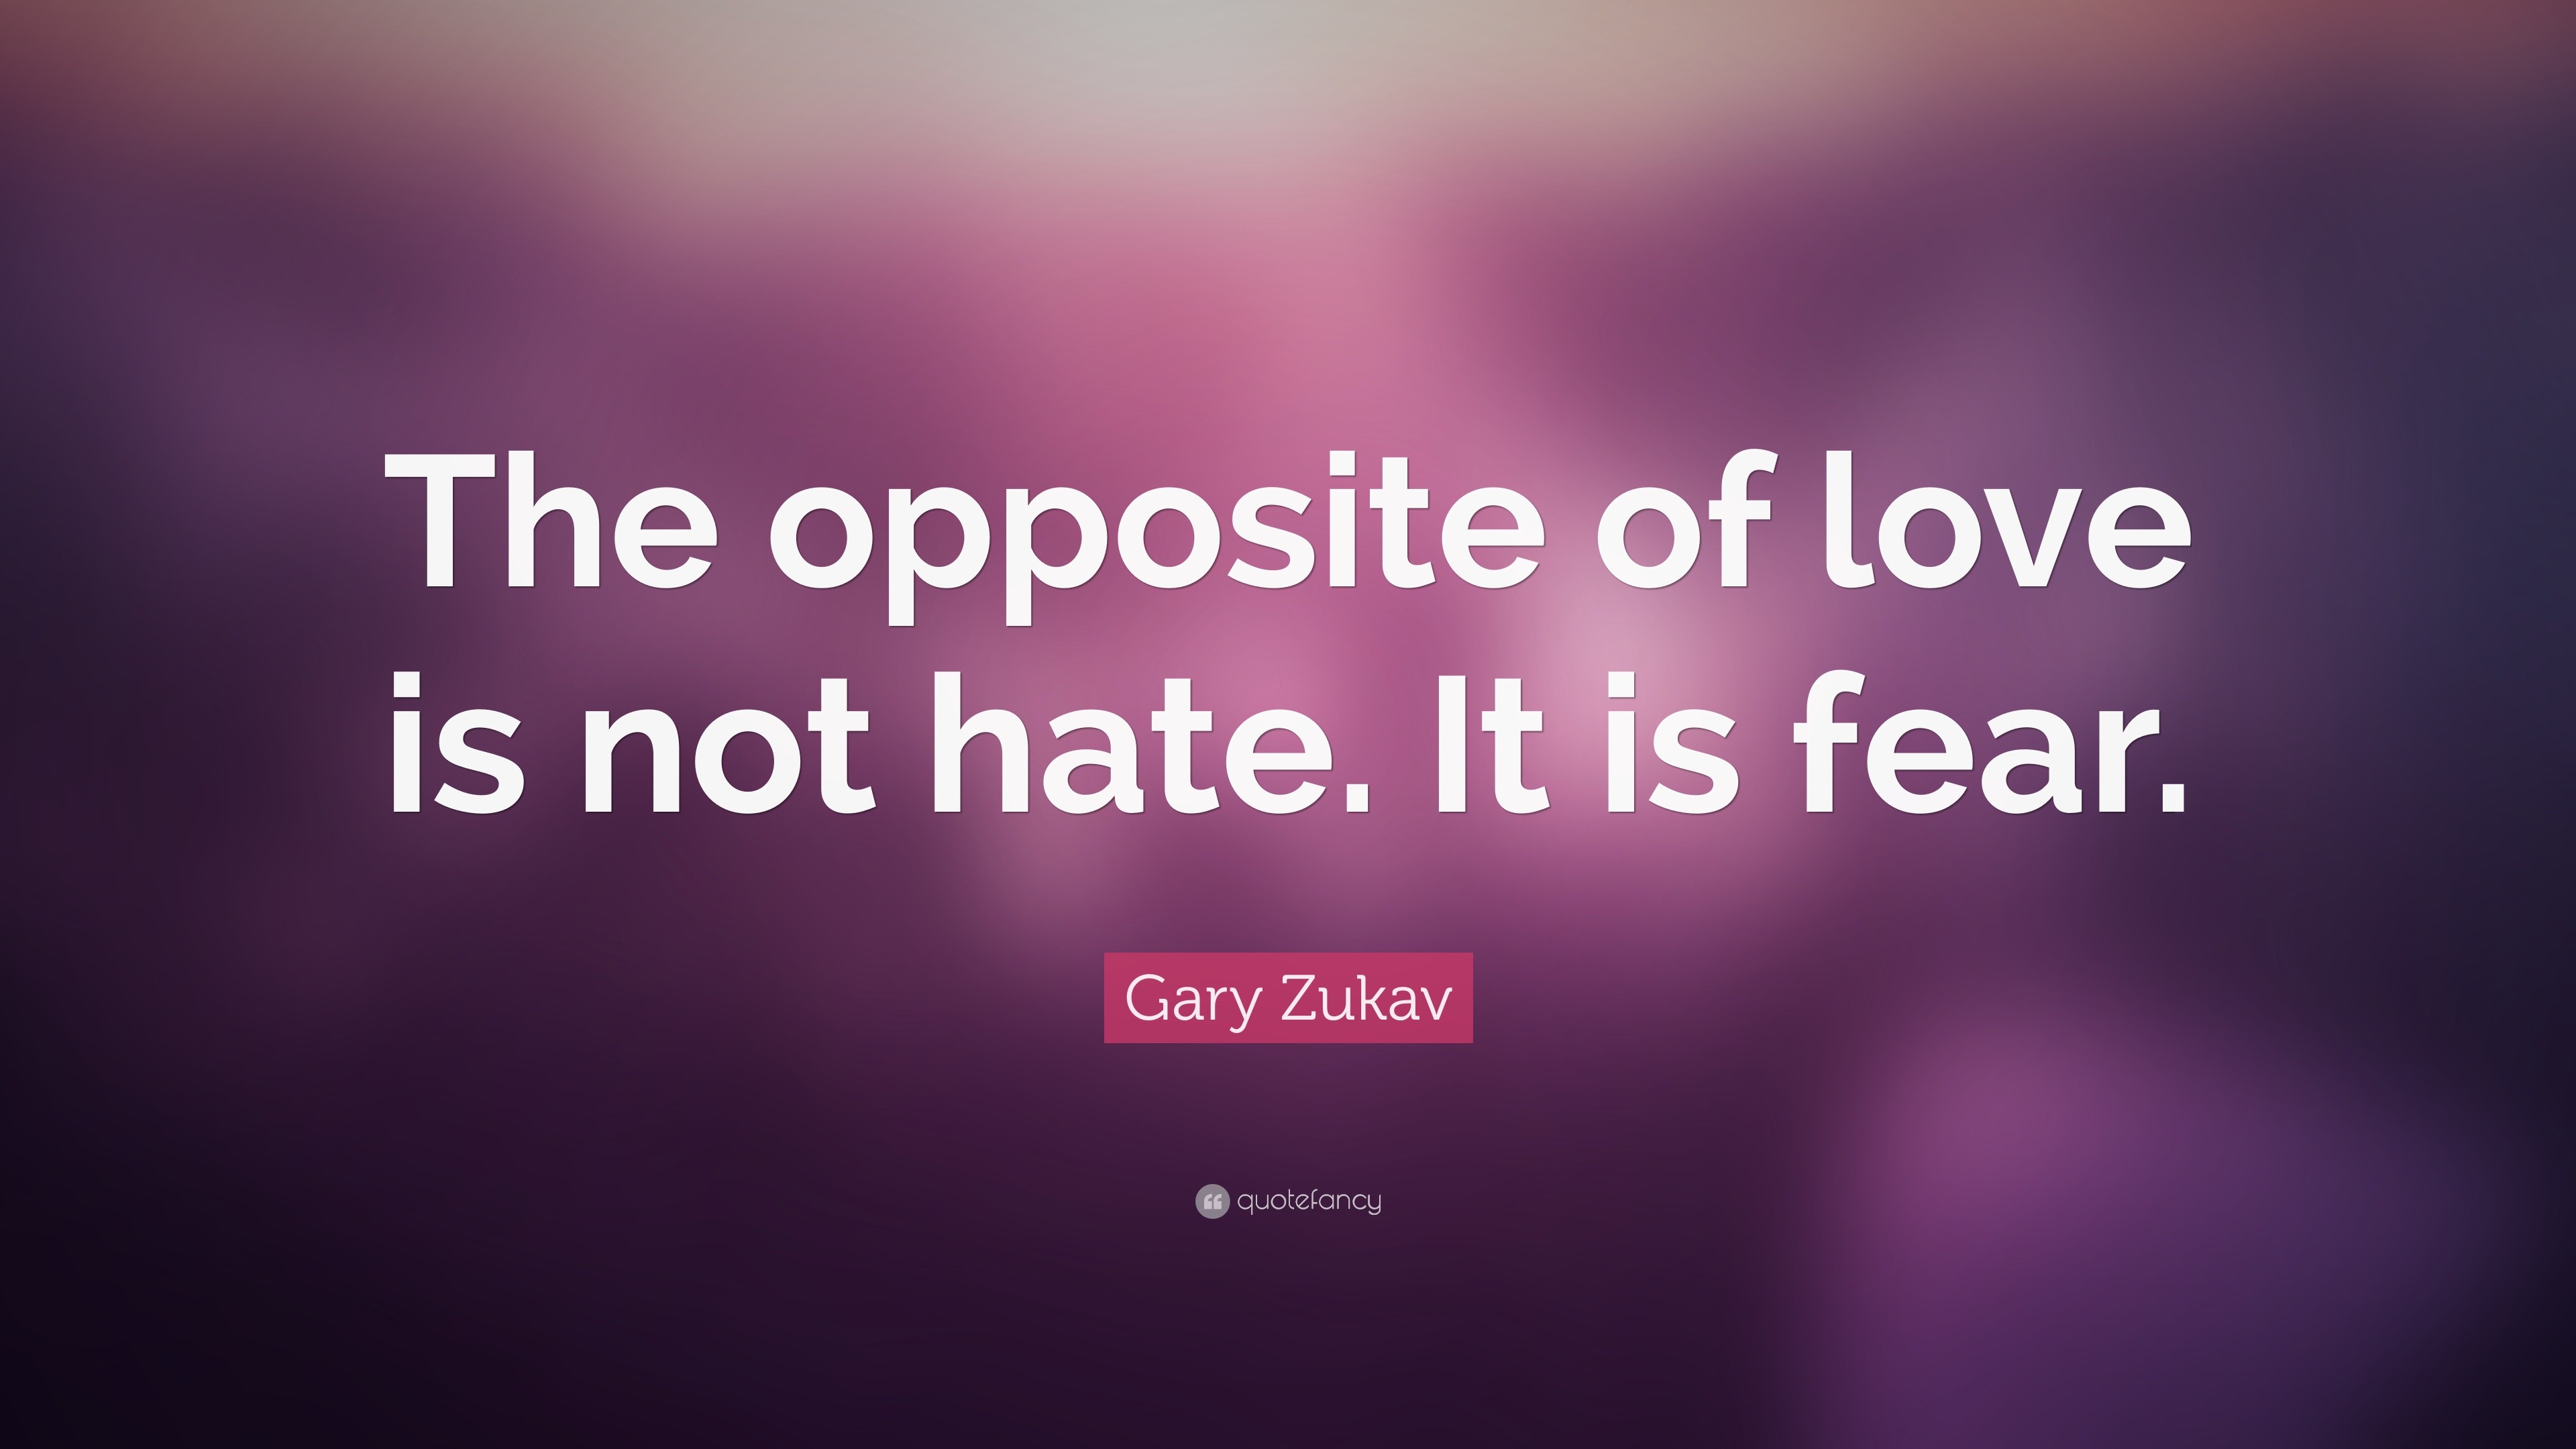 Gary Zukav Quote “The opposite of love is not hate It is fear